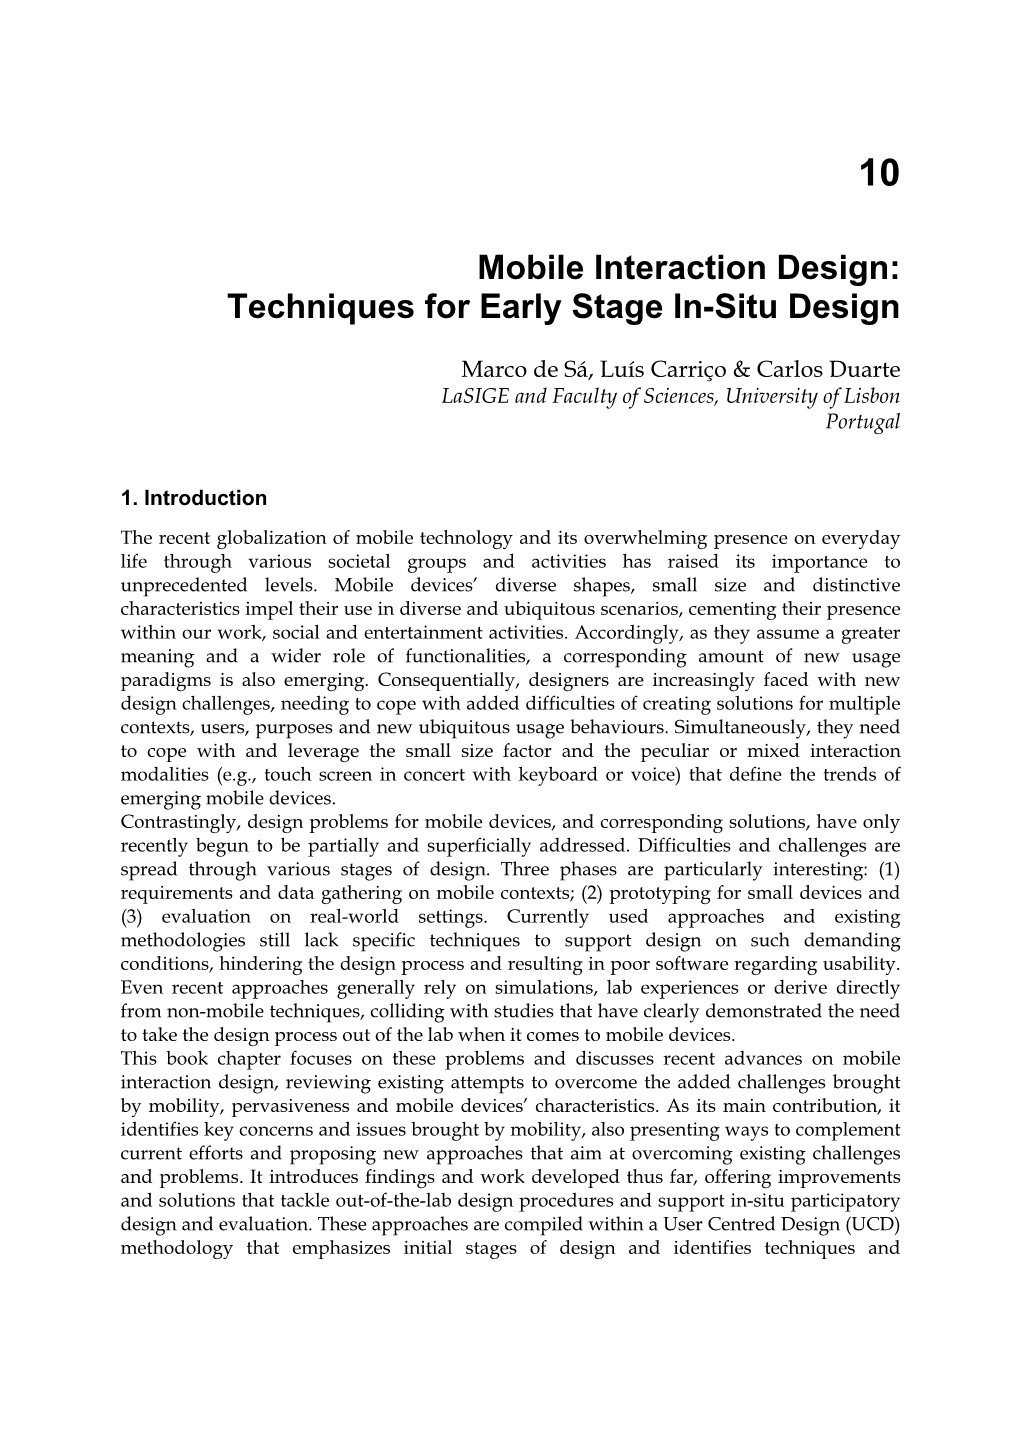 Mobile Interaction Design: Techniques for Early Stage In-Situ Design